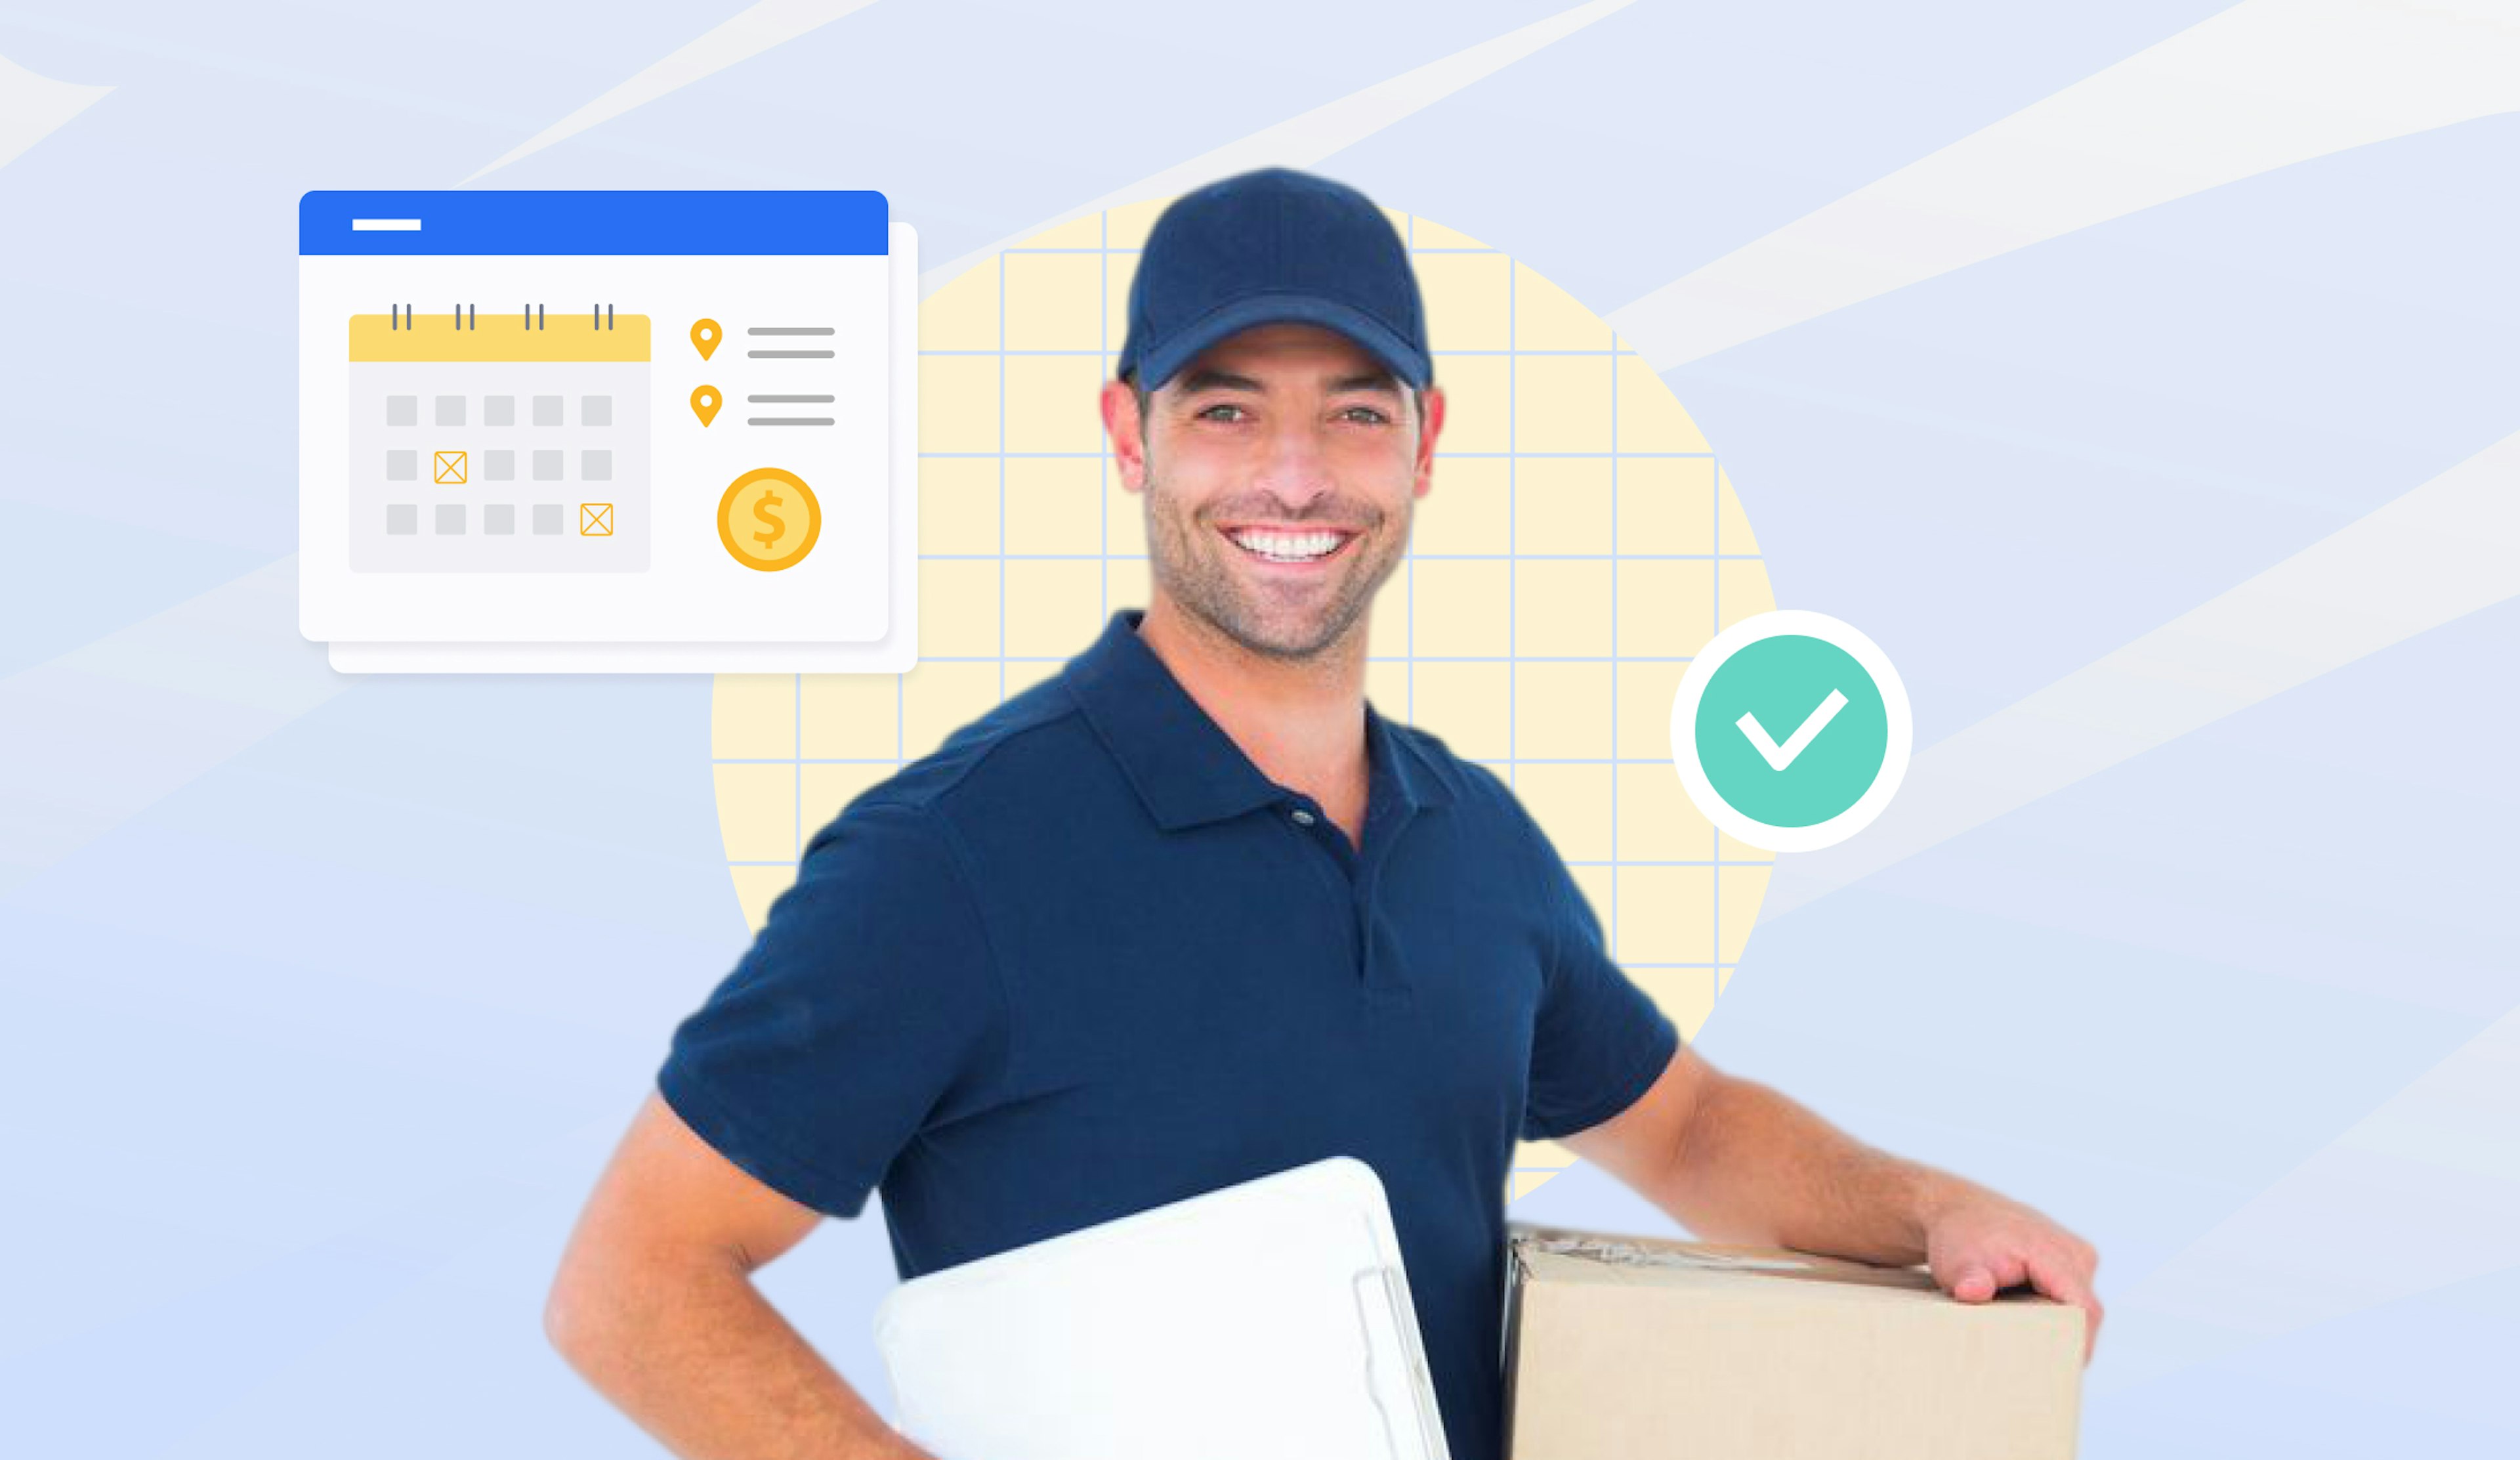 Mid-body shot of a delivery driver in a blue t-shirt and cap carrying a document and a cardboard box. To his left is a calendar with no date shown.